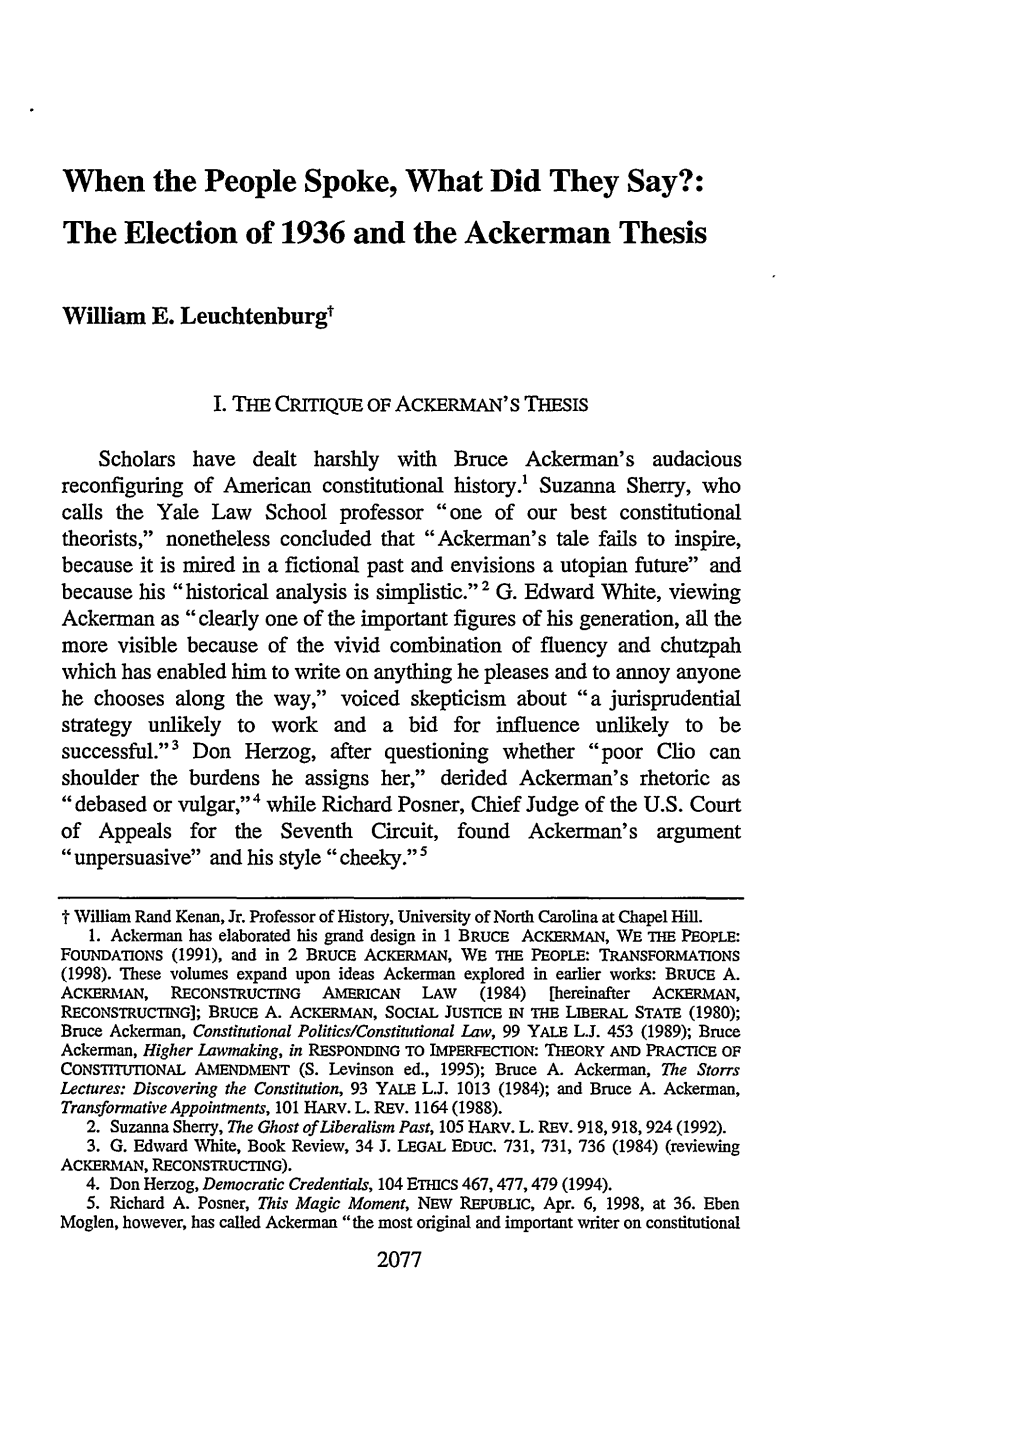 The Election of 1936 and the Ackerman Thesis